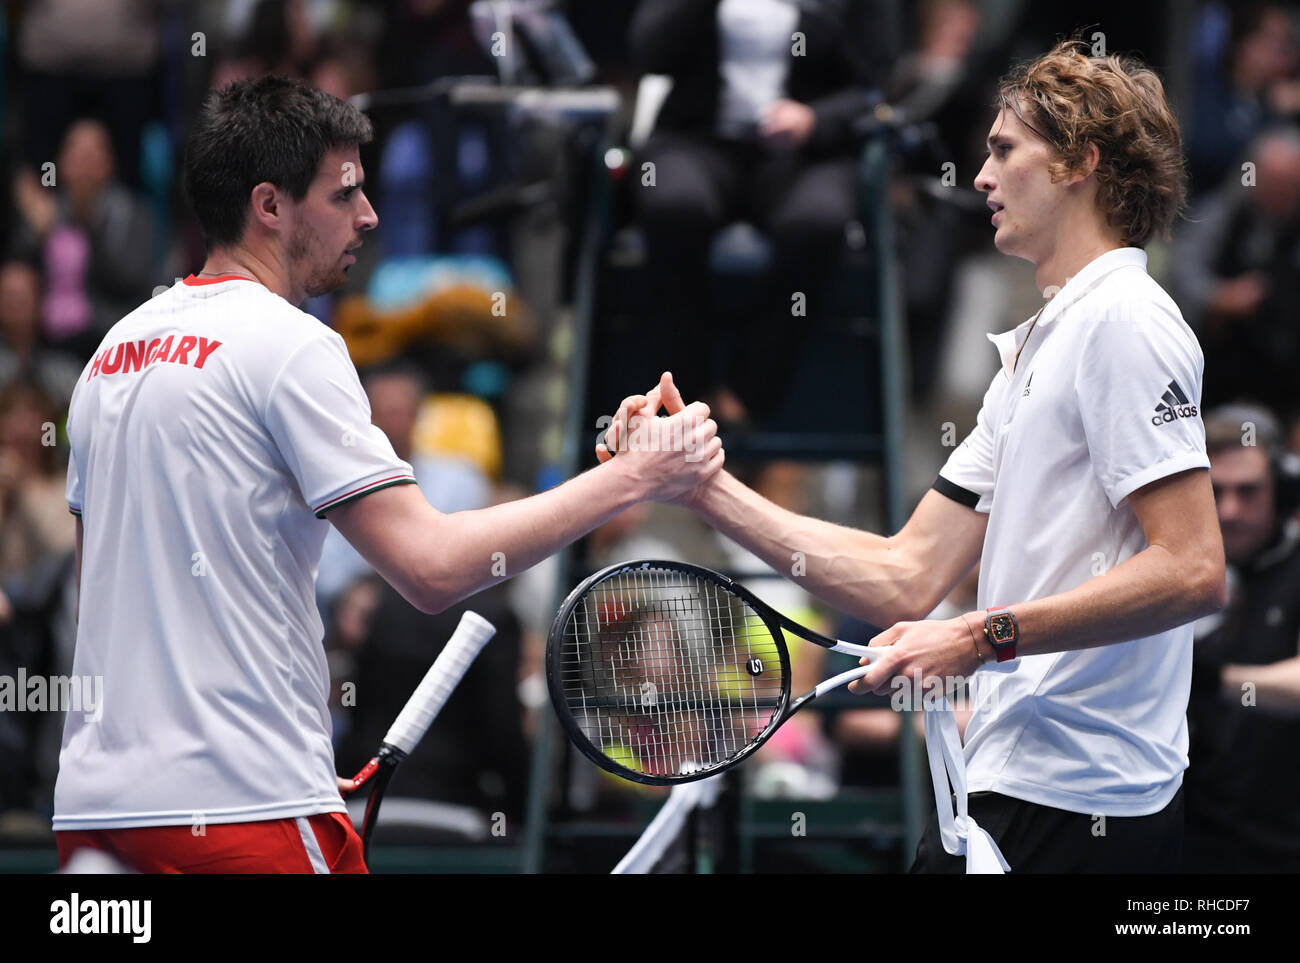 Frankfurt, Germany. Main: Tennis: Davis Cup, qualification round Germany -  Hungary in the Fraport Arena. Germany's Alexander Zverev (r) and Hungary's  Gabor Borsos shake hands after the match. Credit: dpa picture alliance/Alamy